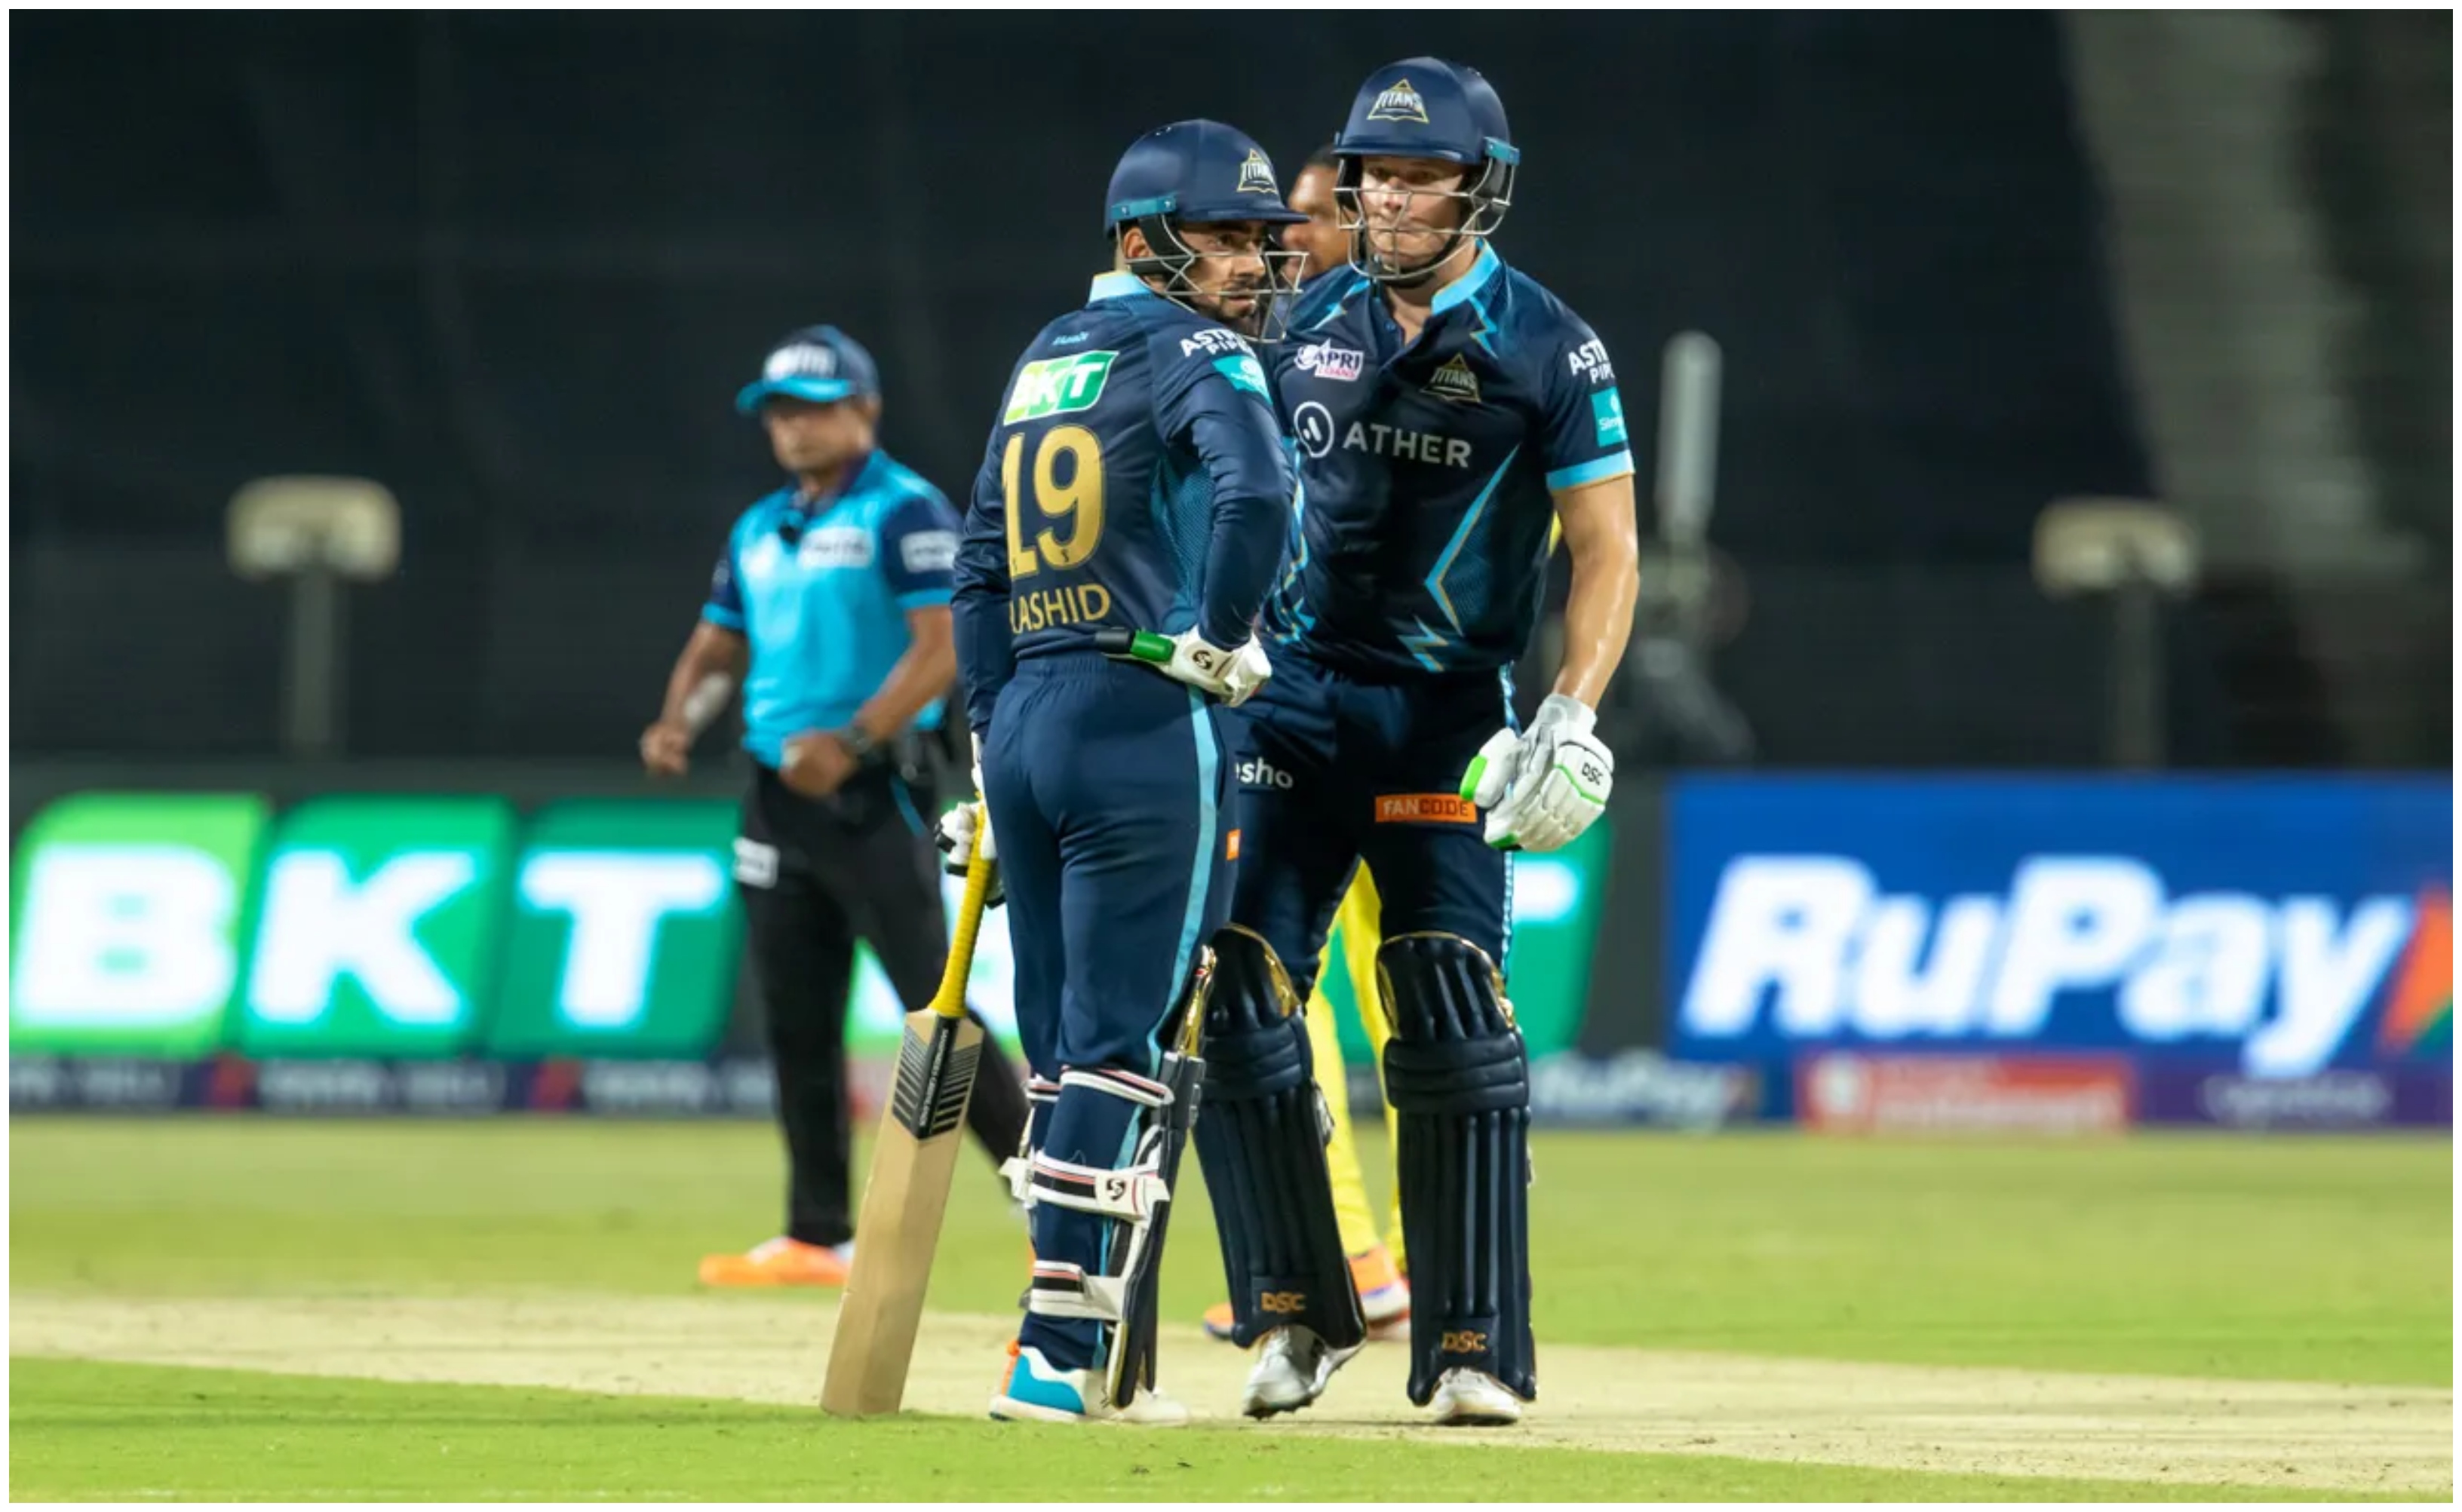 David Miller and Rashid Khan snatched victory from the jaws of defeat for GT | BCCI - IPL